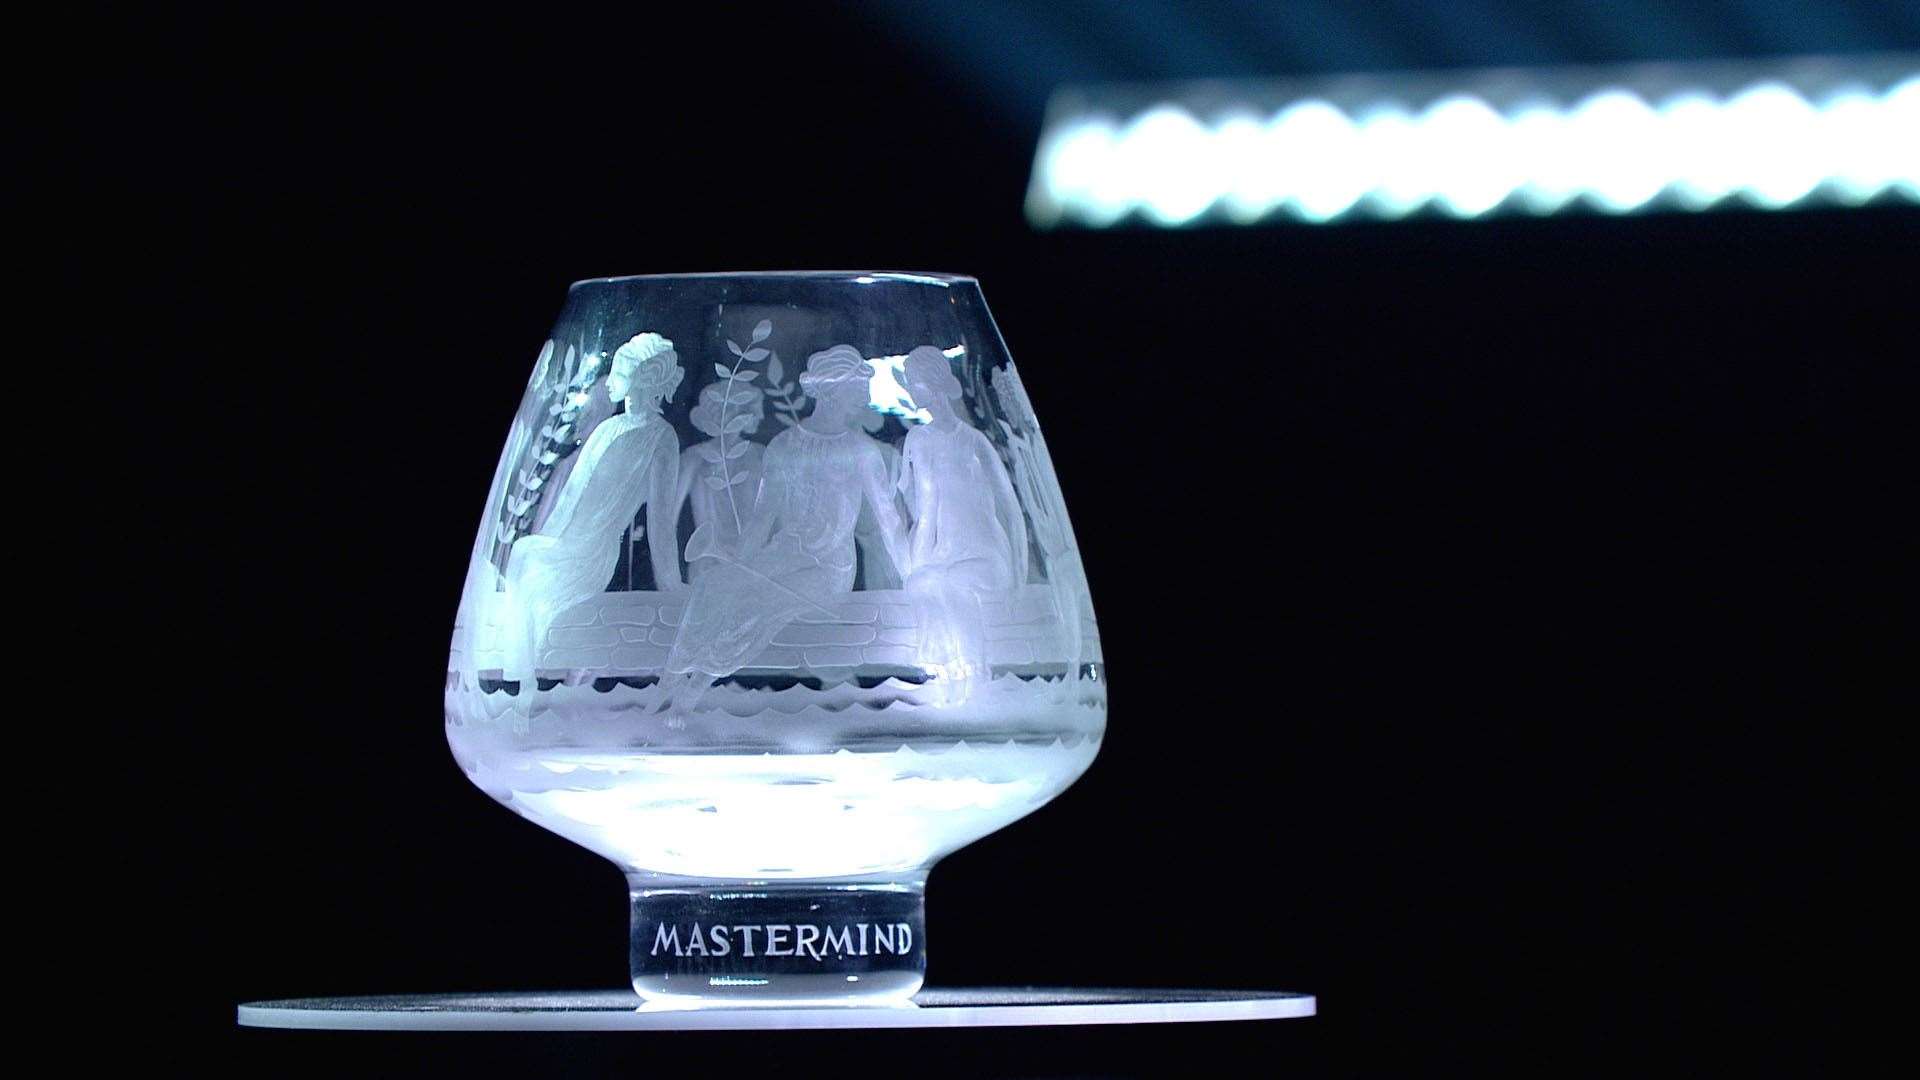 The Mastermind trophy, designed by Denis Mann. Picture: BBC / Hindsight and Hat Trick Productions